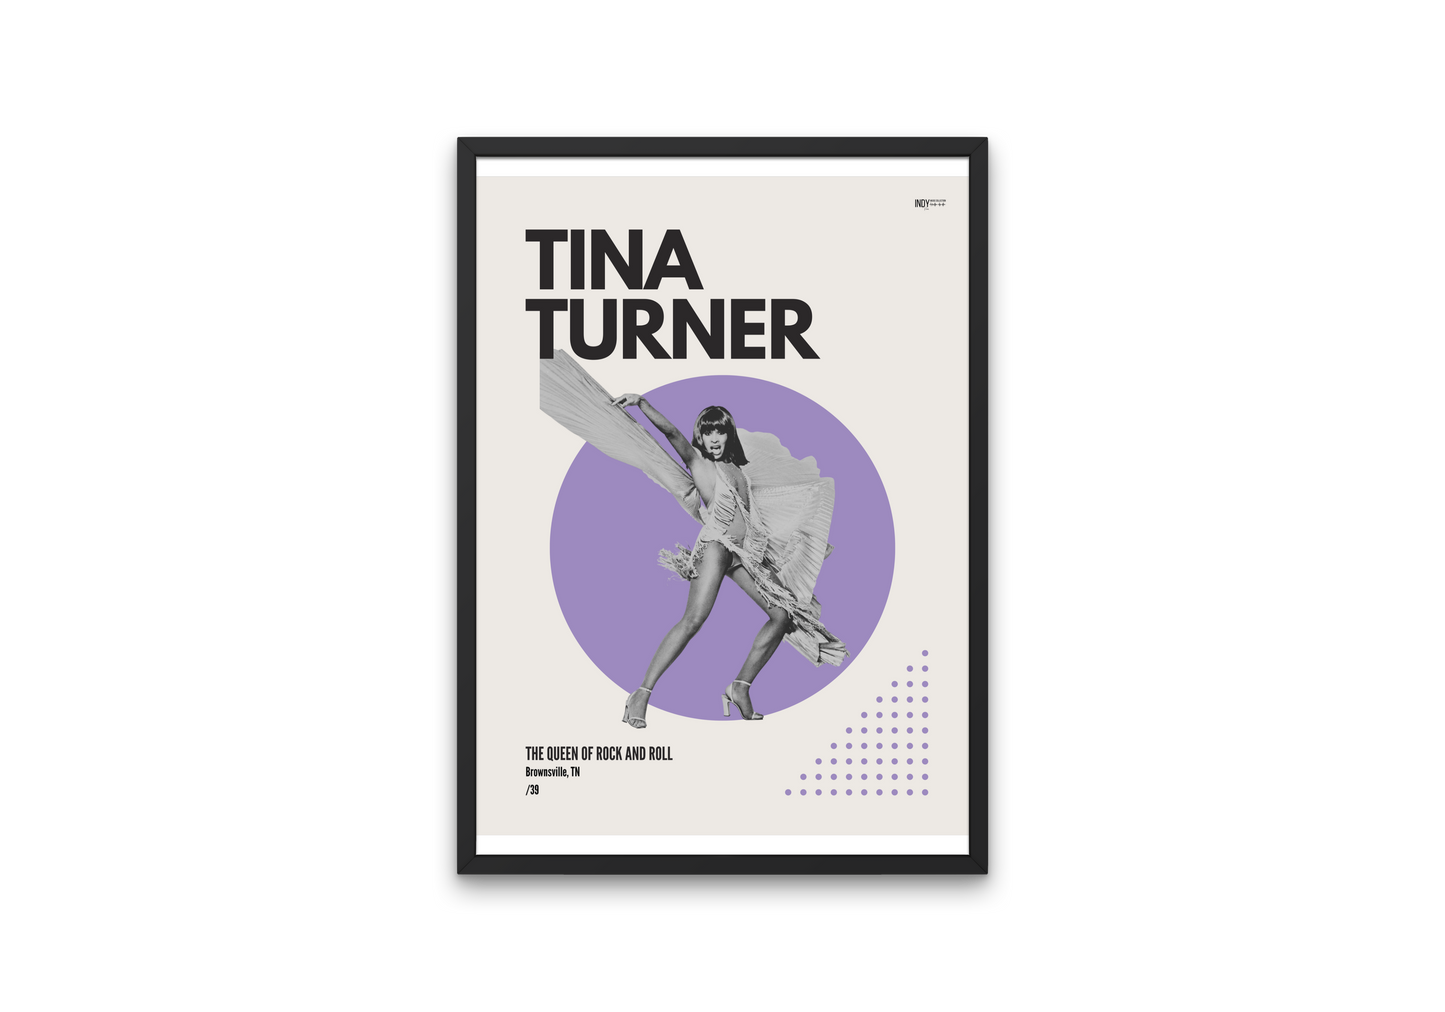 Tina Turner - The Queen of Rock and Roll Mid-Century Modern Artist Poster